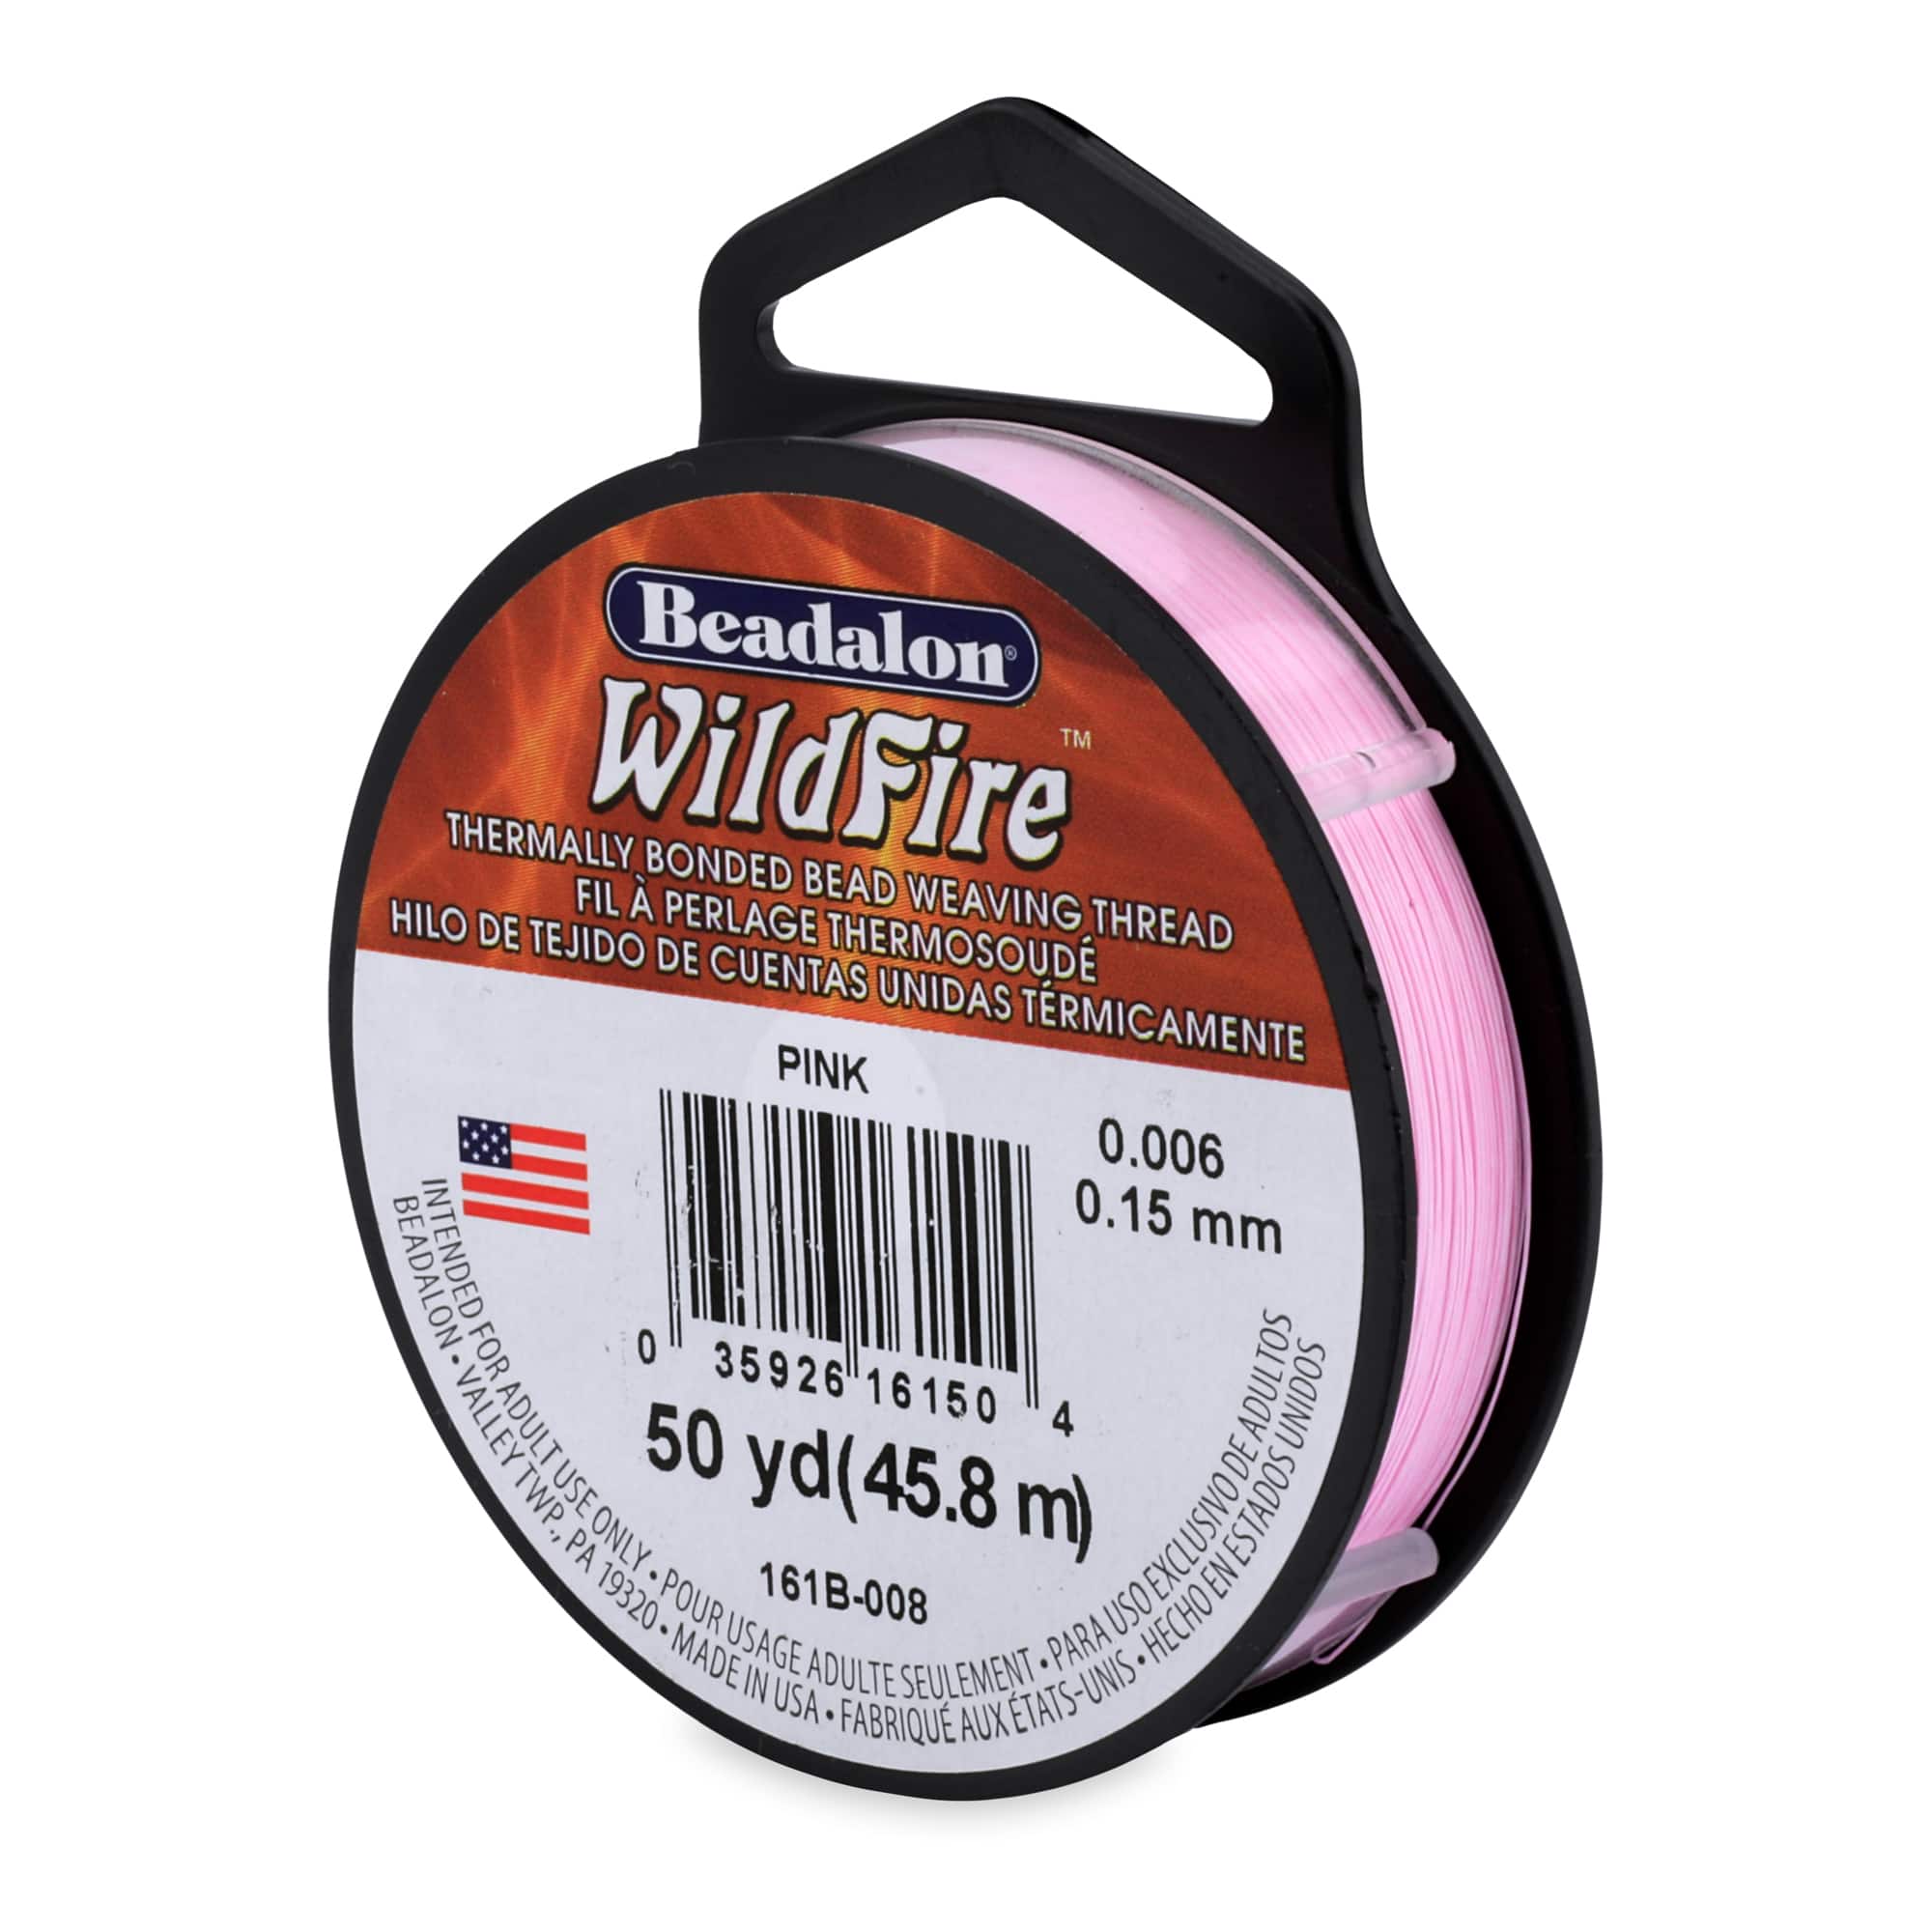  Wildfire Thermal Bonded Beading Thread .008 Inch - Black - 50 Yd